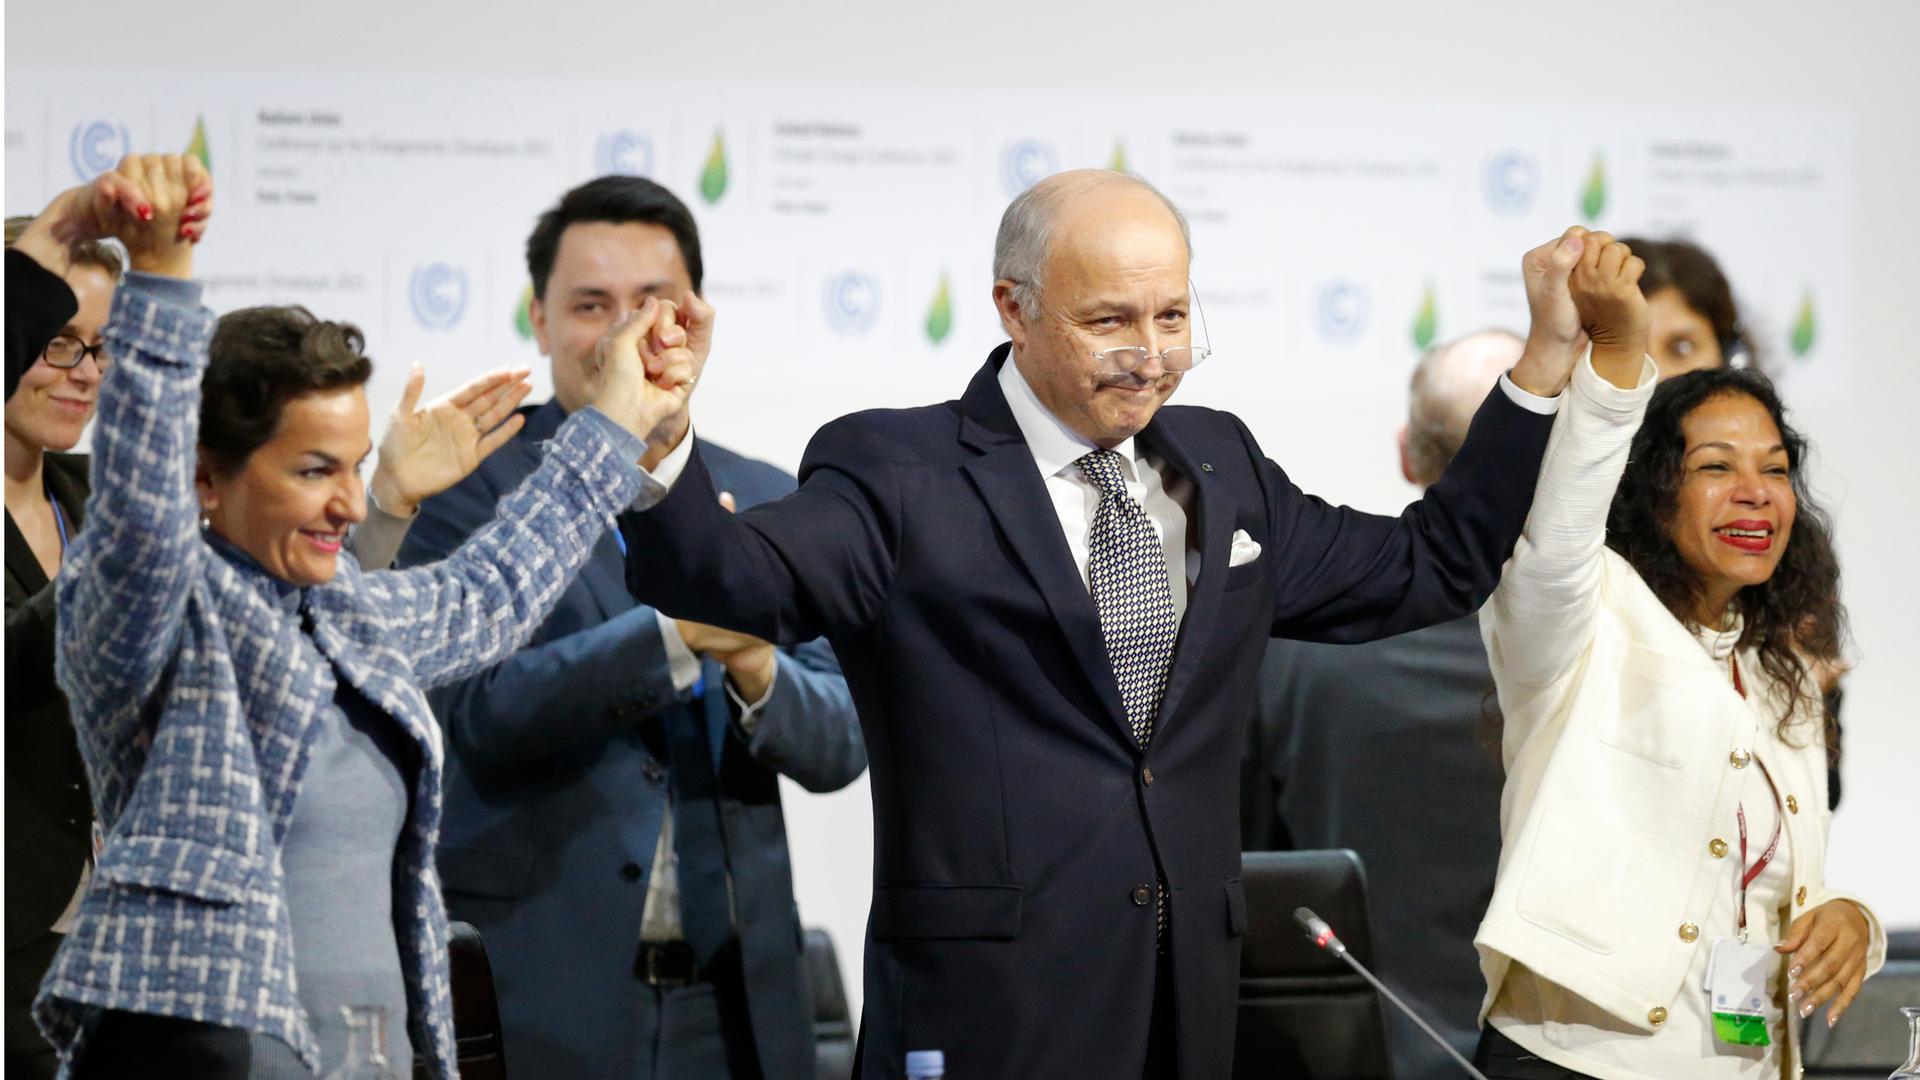 French Foreign Minister Laurent Fabius (C), president-designate of the UN climate summit, and Christiana Figueres (L), executive secretary of the UN Framework Convention on Climate Change, celebrate during the final session of the World Climate Change Con